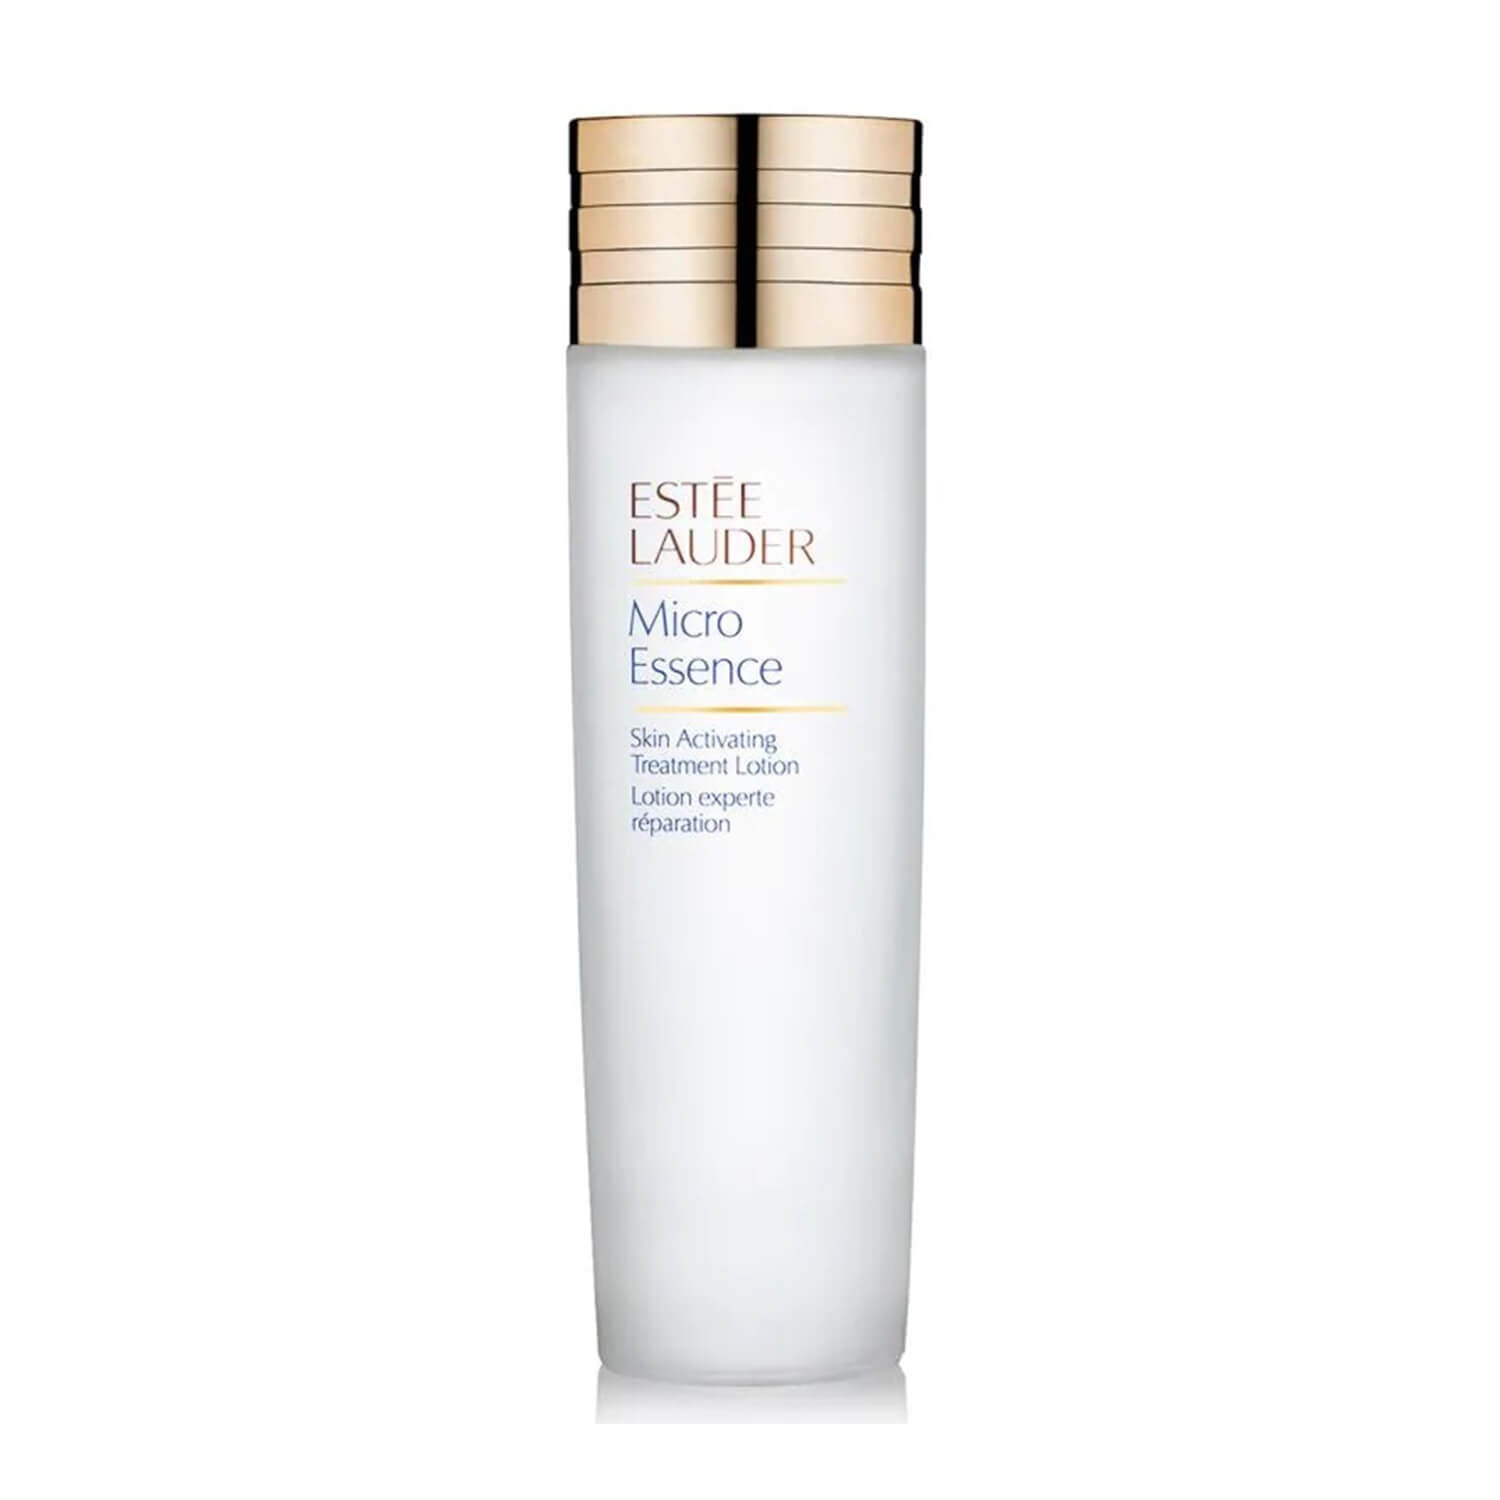 shop estee lauder micro essence skin lotion available at heygirl.pk for cash on delivery in Pakistan